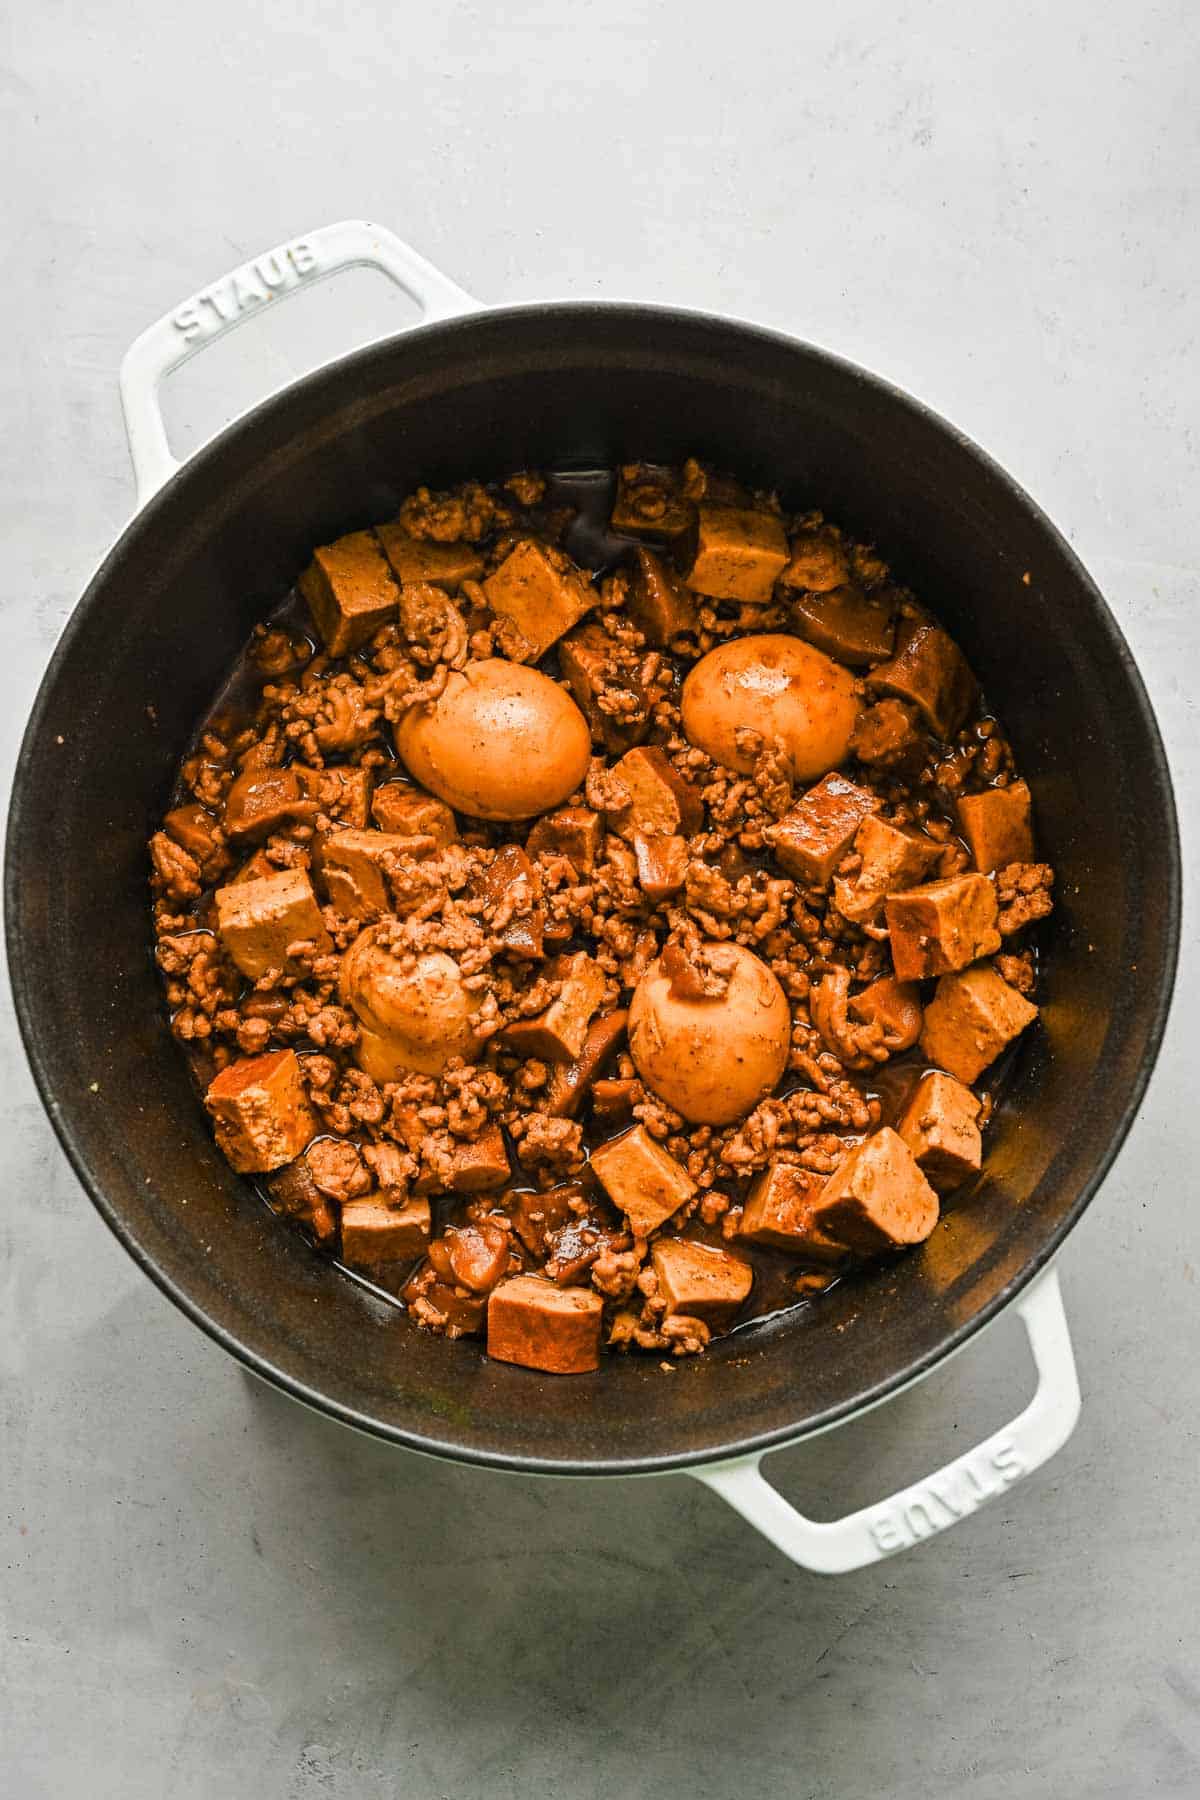 Overhead view of braised minced pork in a pot with eggs, mushrooms, and tofu.